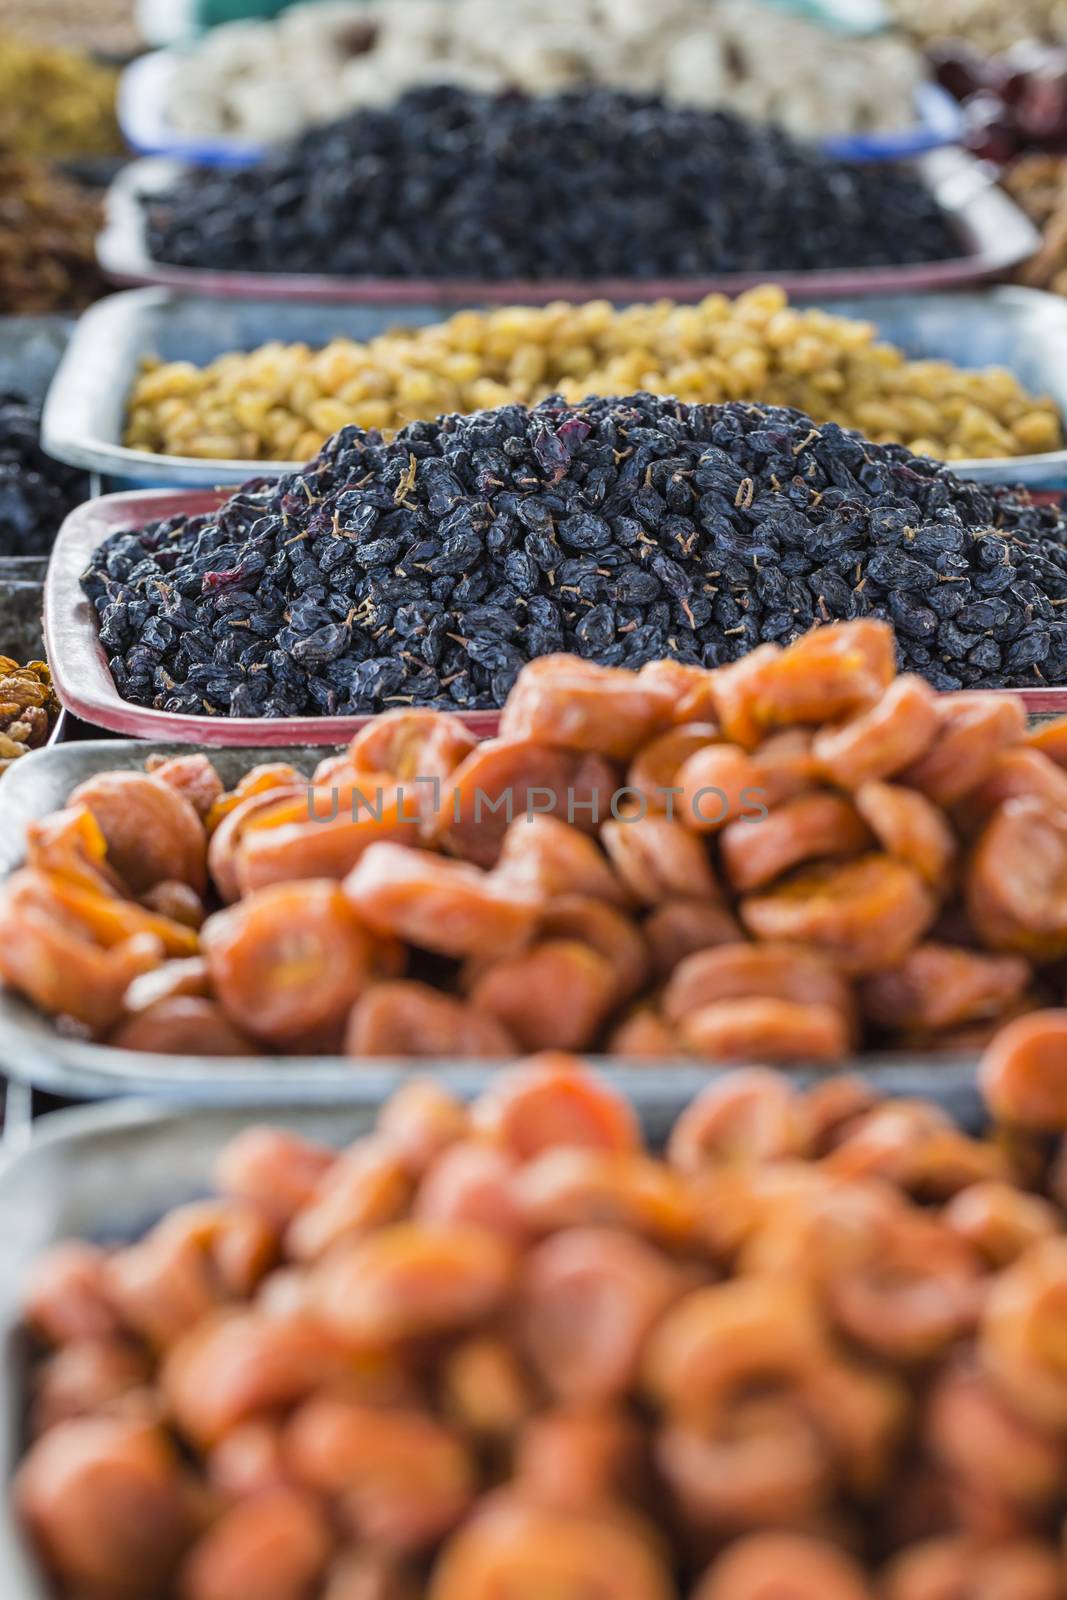 Dry fruits and spices like cashews, raisins, cloves, anise, etc. on display for sale in a bazaar in Osh Kyrgyzstan.